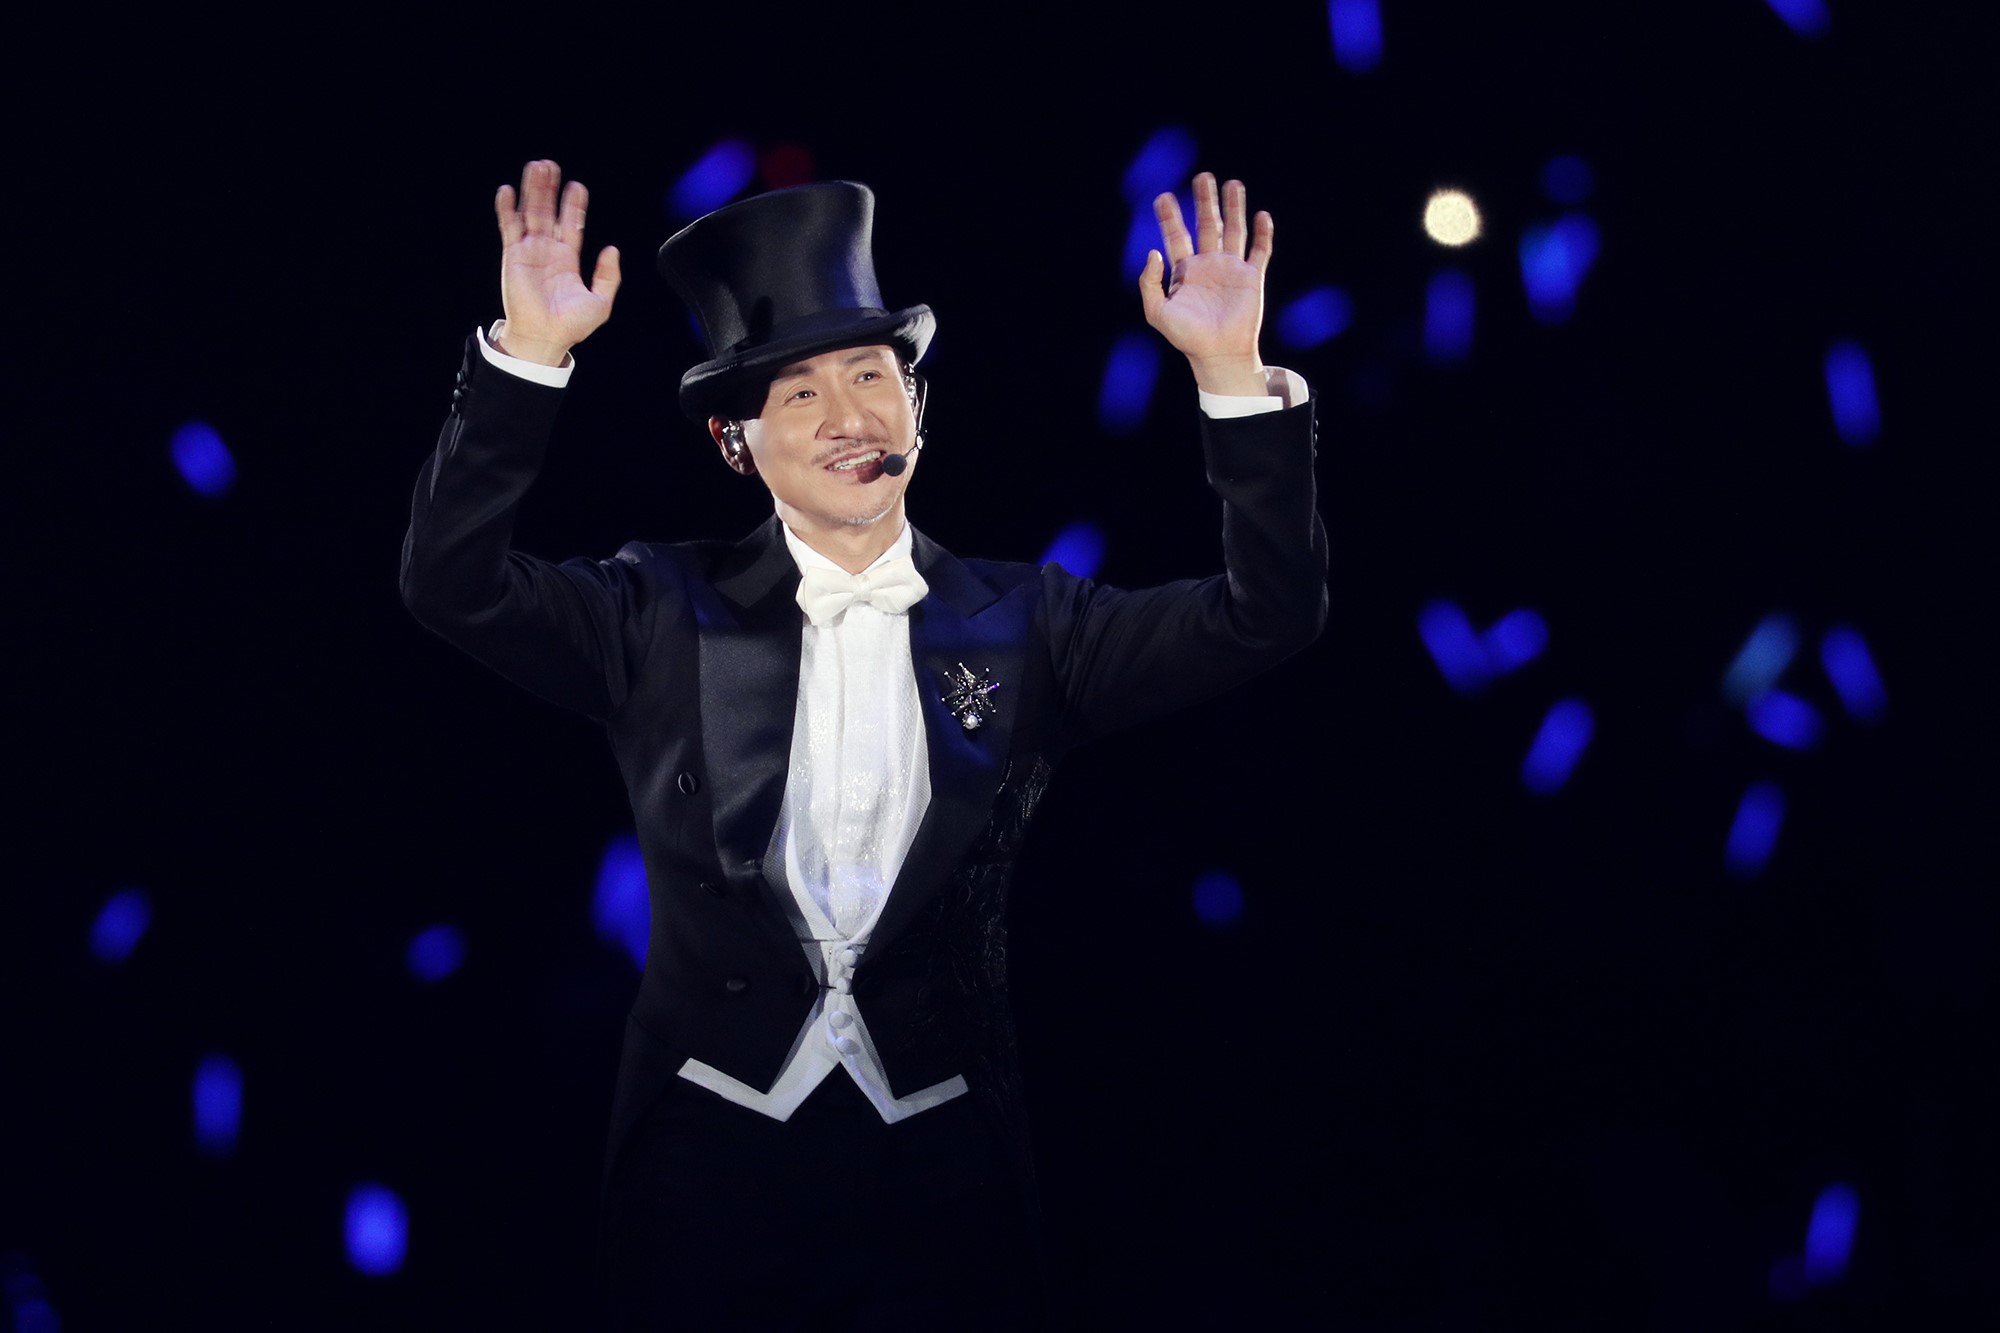 Jacky Cheung To Return To Malaysia For Another Concert This October?